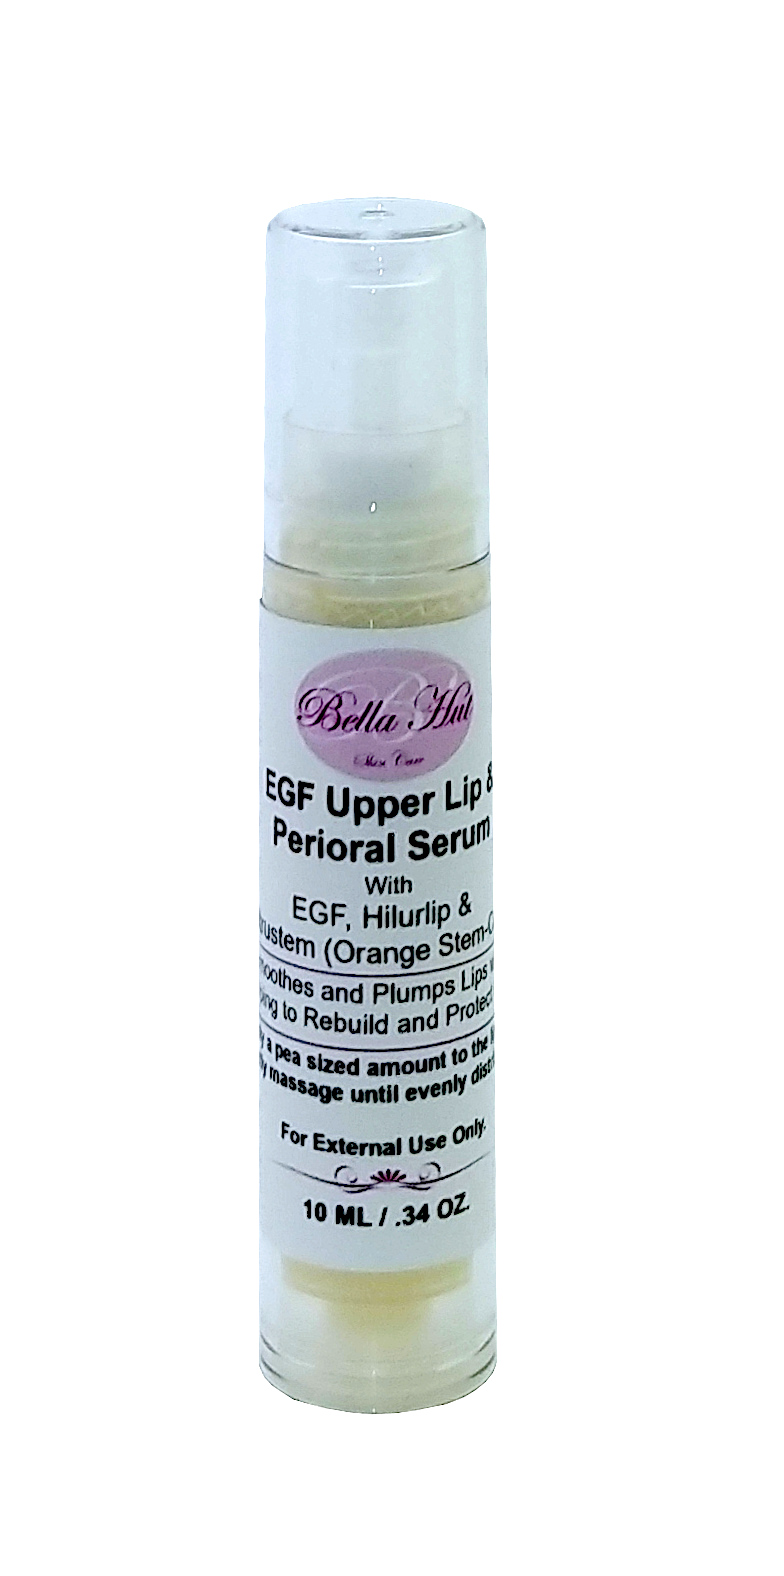 An EGF serum to help boost collagen and protect lips